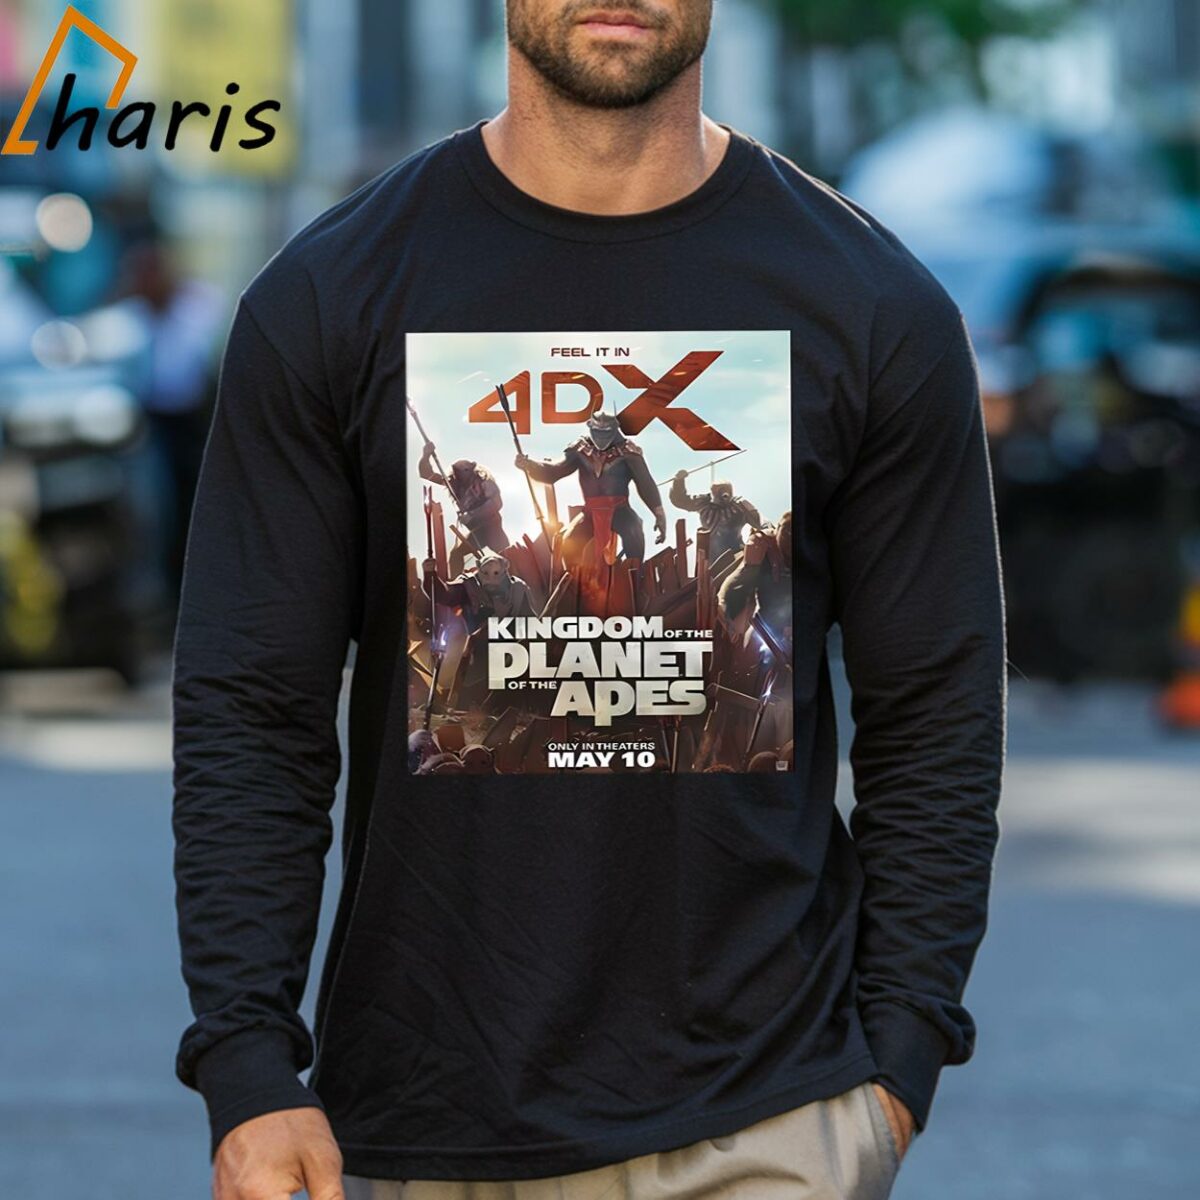 Kingdom Of The Planet Of The Apes 4DX Poster T shirt 3 Long sleeve shirt